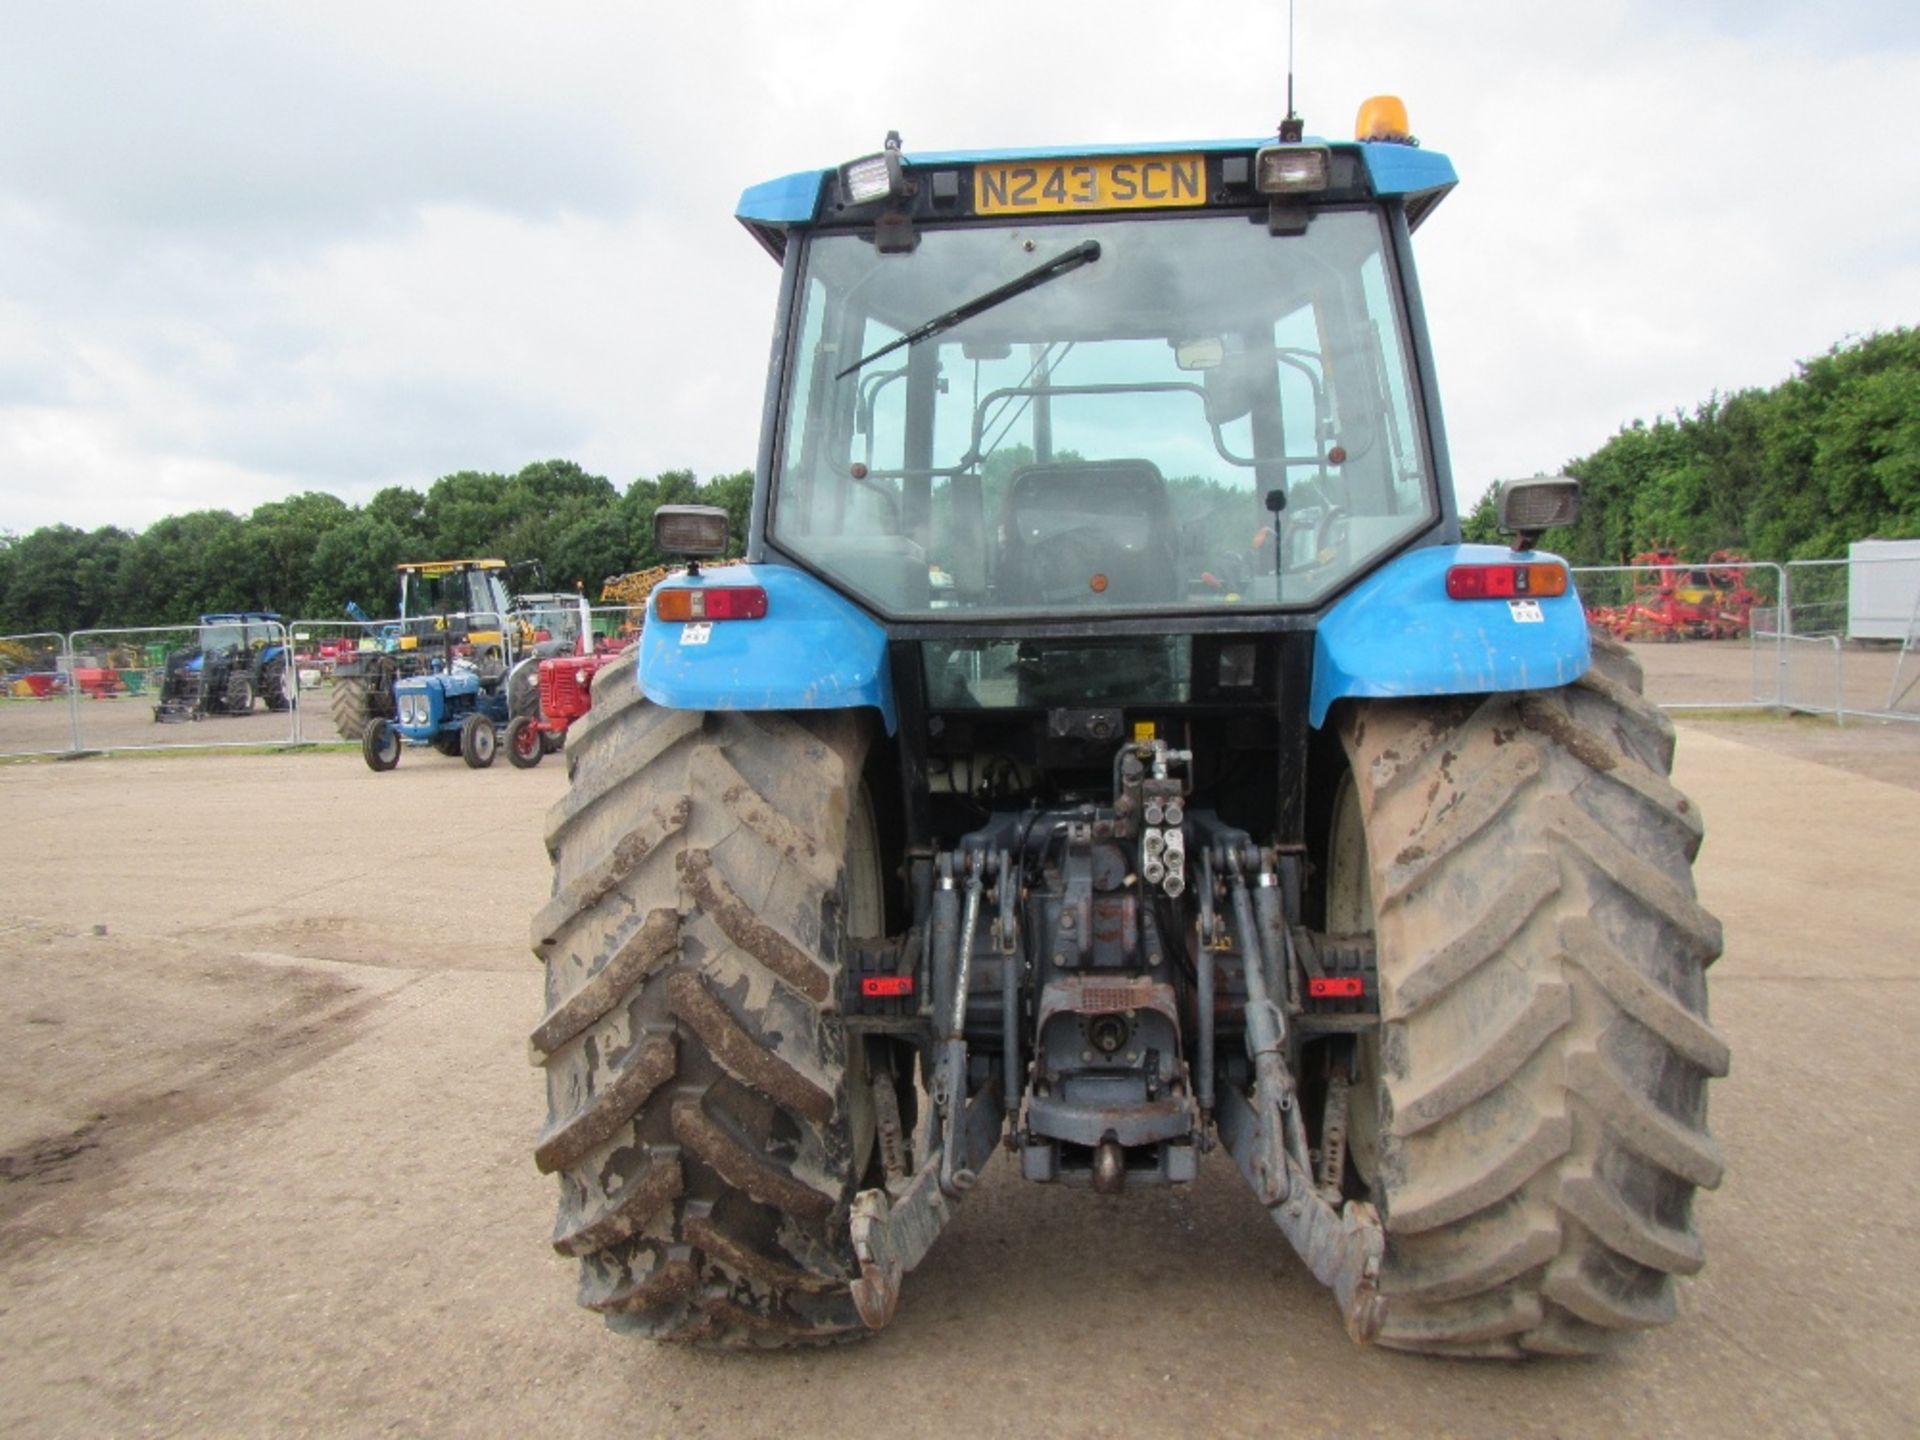 New Holland 8340 SLE 4wd Tractor. Reg. No. N243 SCN Ser. No. 025324B - Image 6 of 20